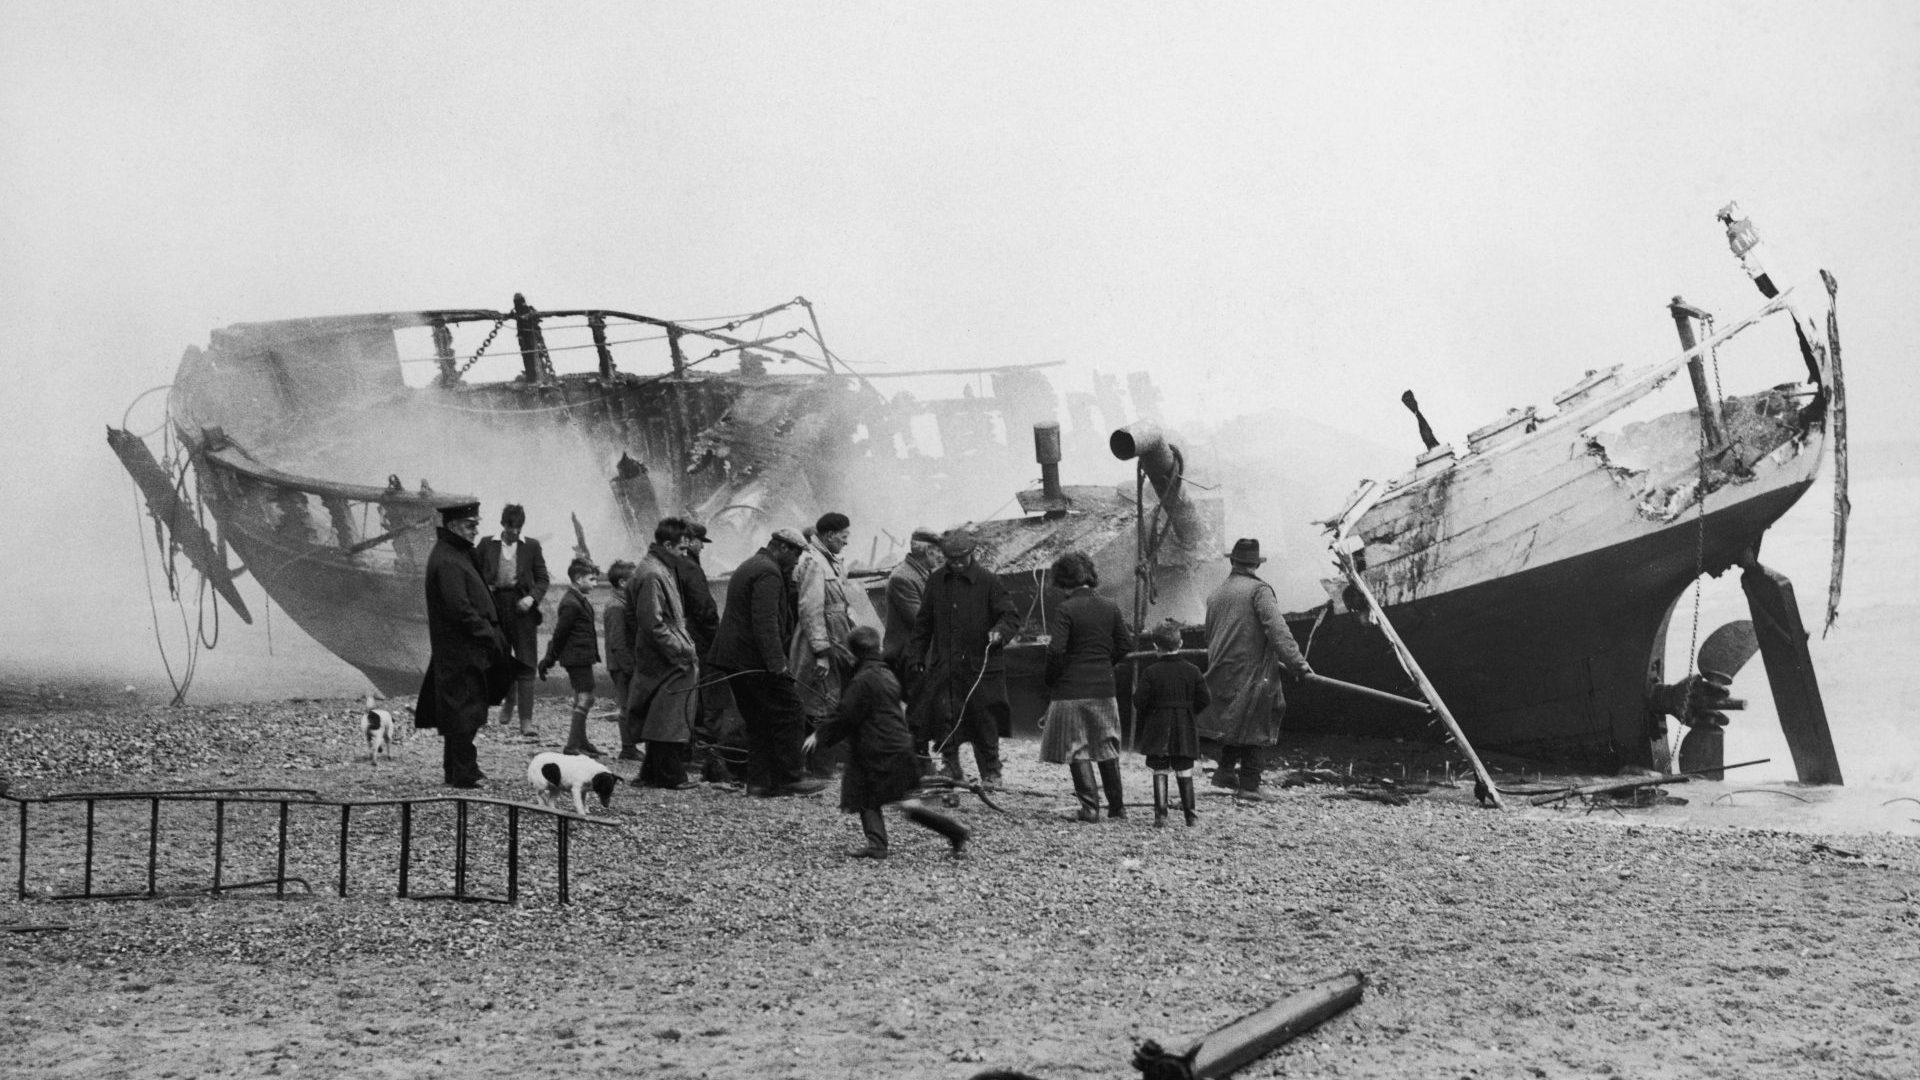 Curious onlookers examine the burning wreck of a trawler in Yorkshire, 1937. Many fishing companies are seeing their future go up in smoke. Photo: Fox Photos/Hulton Archive/Getty